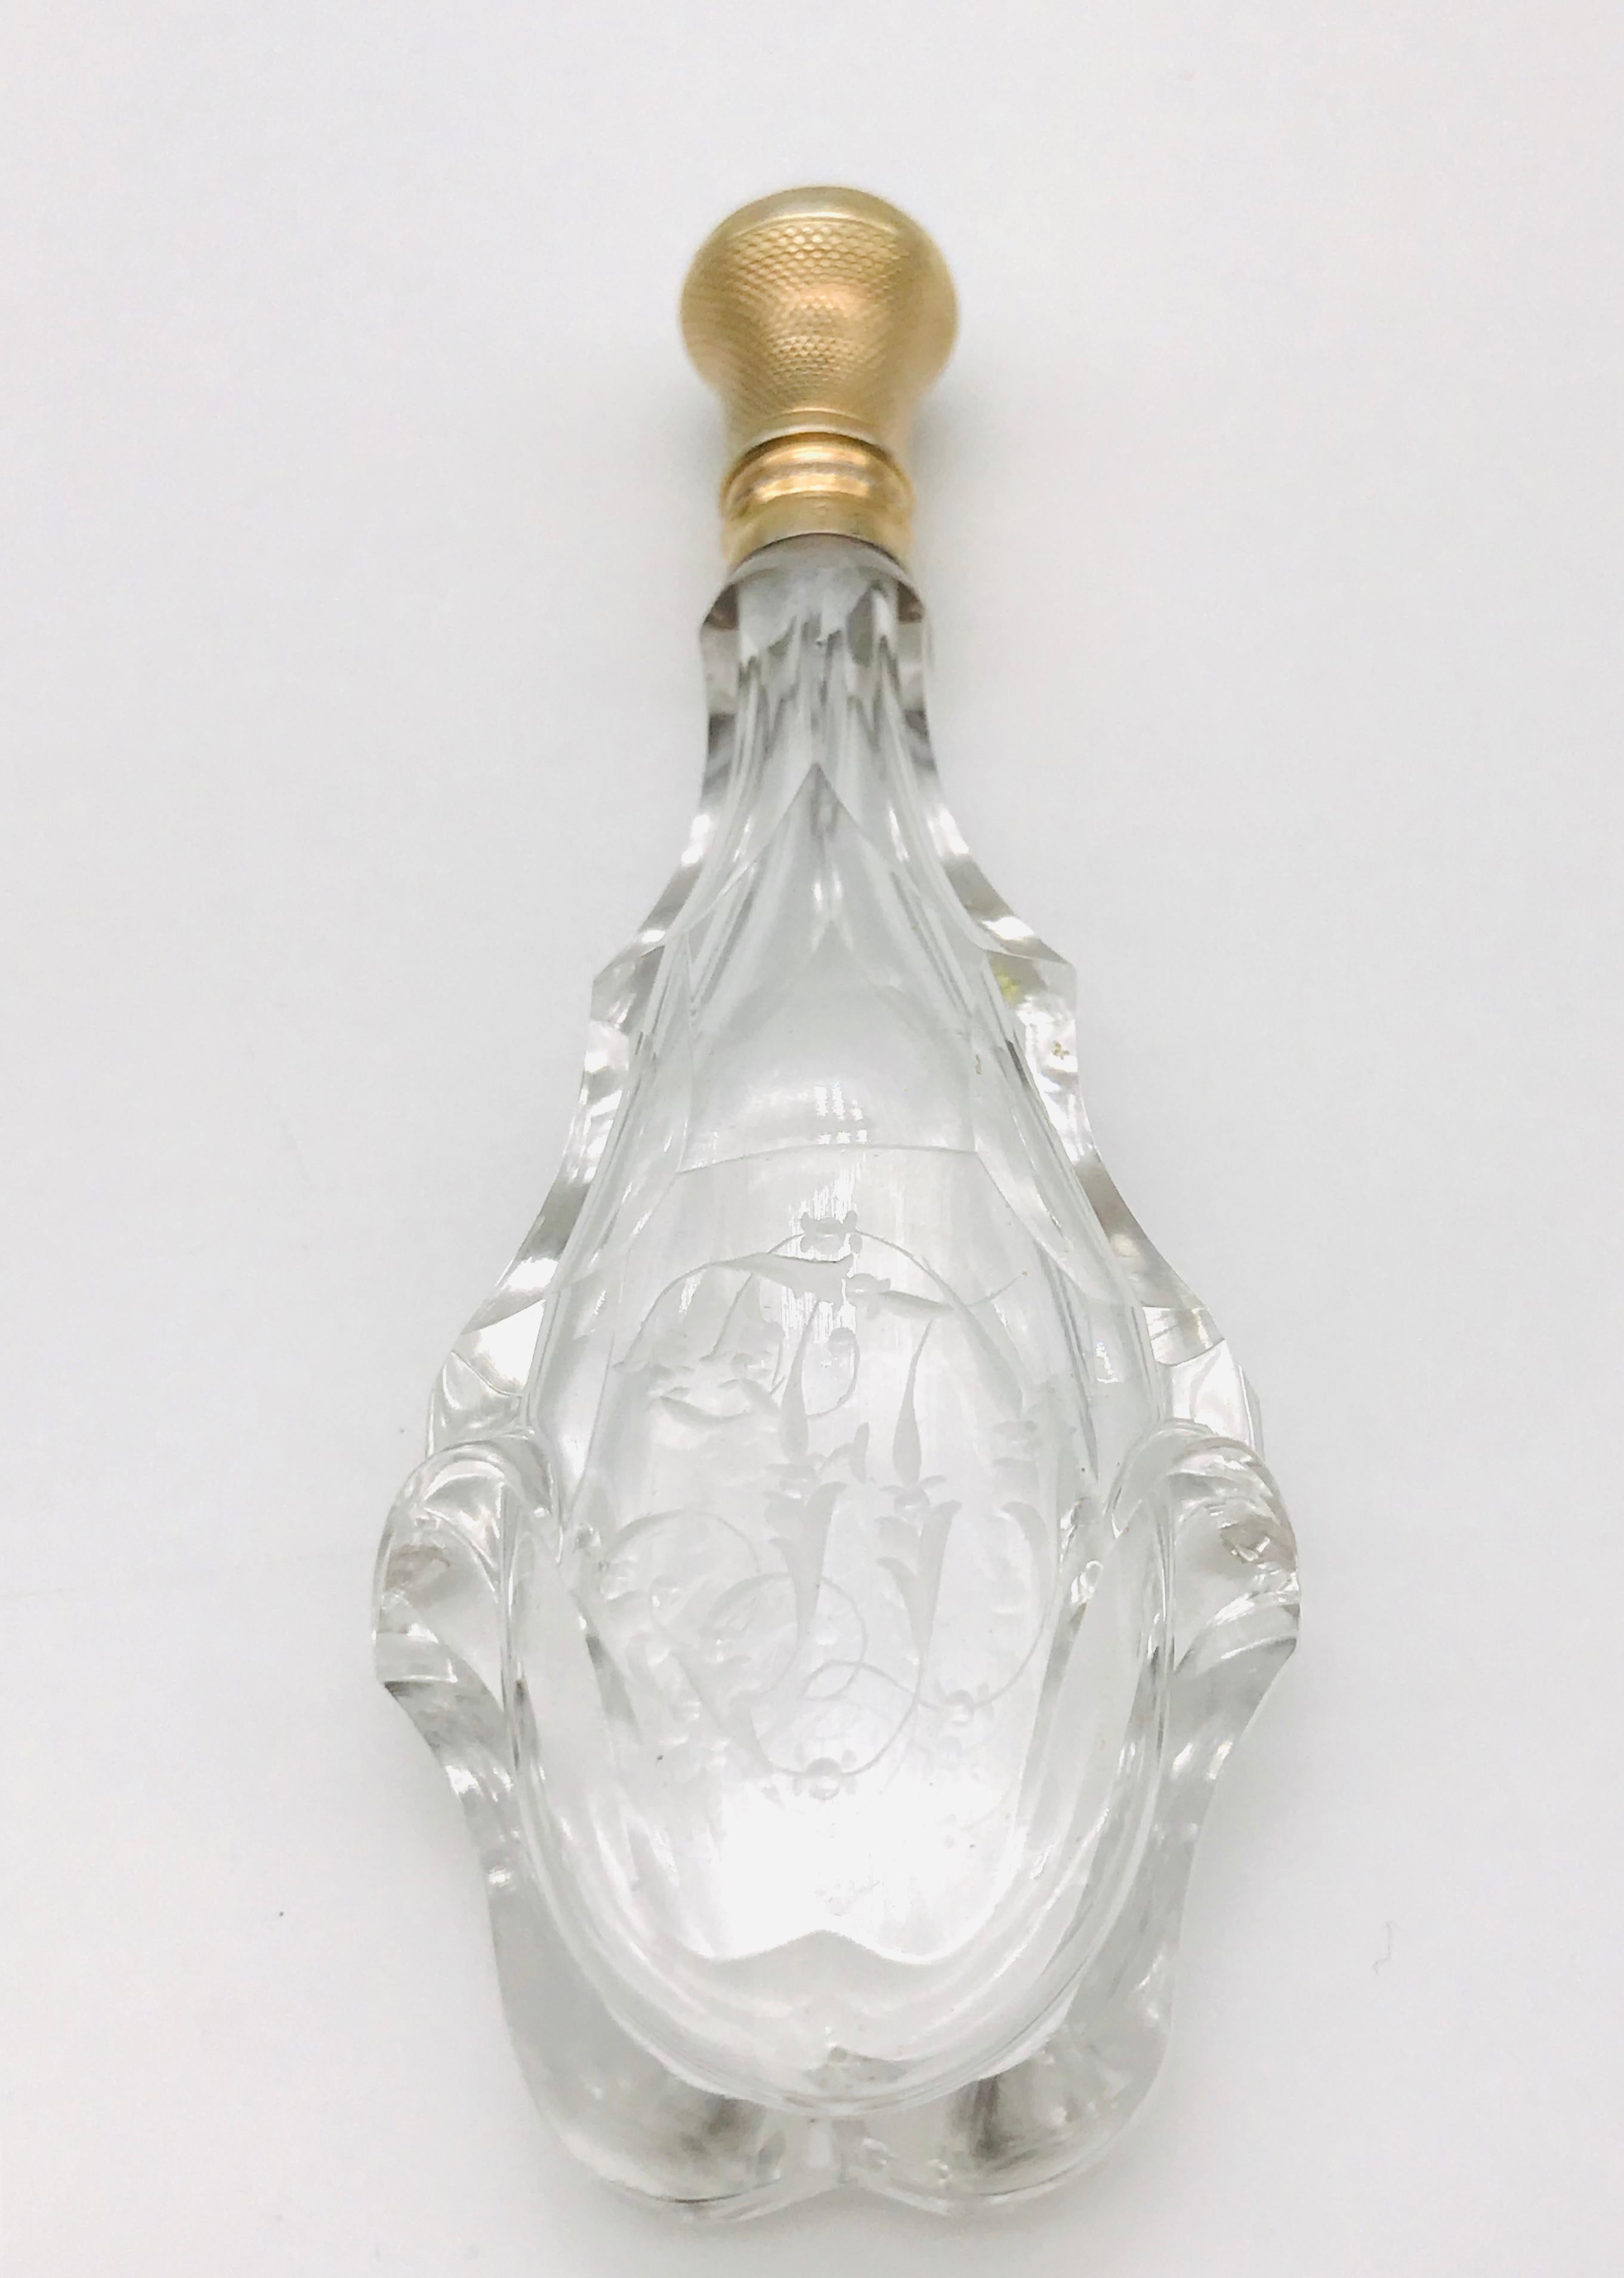 Welcome to the enchanting world of collectible perfume bottles. This crystal bottle, dating from the Charle X period (1830), is a true marvel. Its exquisite design and meticulous craftsmanship make it an exceptional piece for perfume bottle